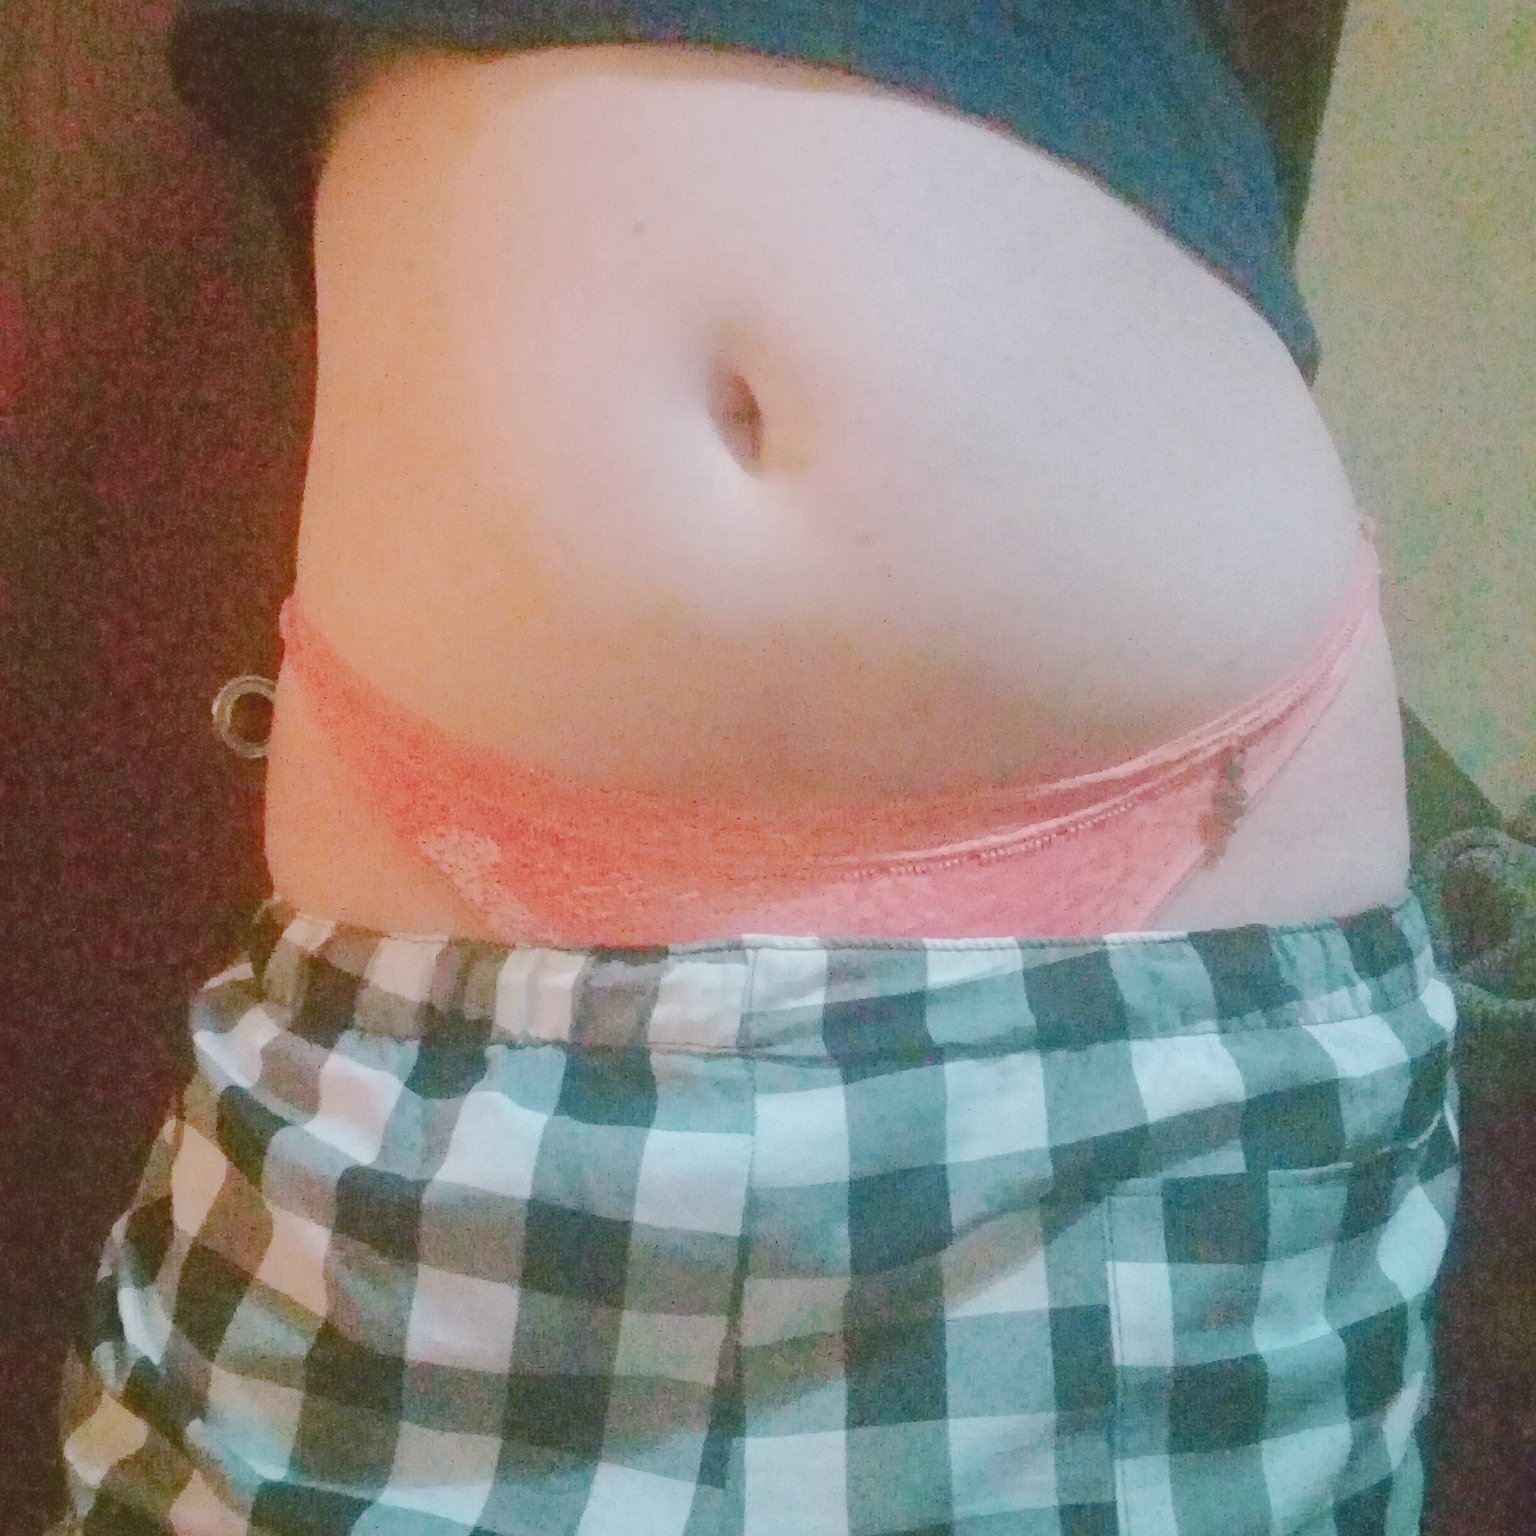 Photo by Slutty Pet RedHead with the username @MonstergirlGF,  September 15, 2020 at 9:36 AM. The post is about the topic Teen and the text says 'Do you like my tummy? 💘'